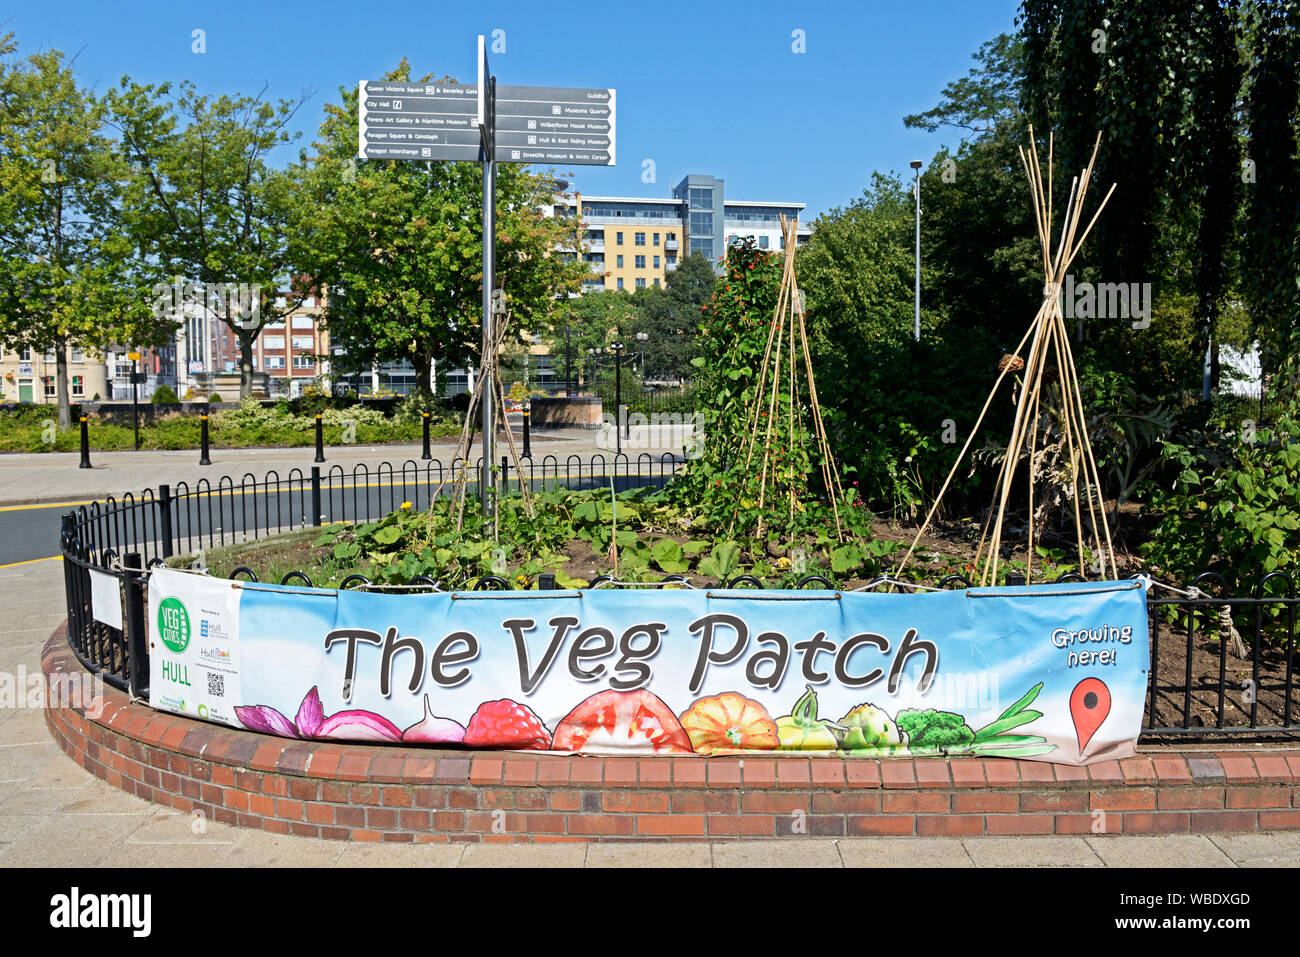 The Veg Patch, a food partnership, in Hull, East Yorkshire, England UK Stock Photo